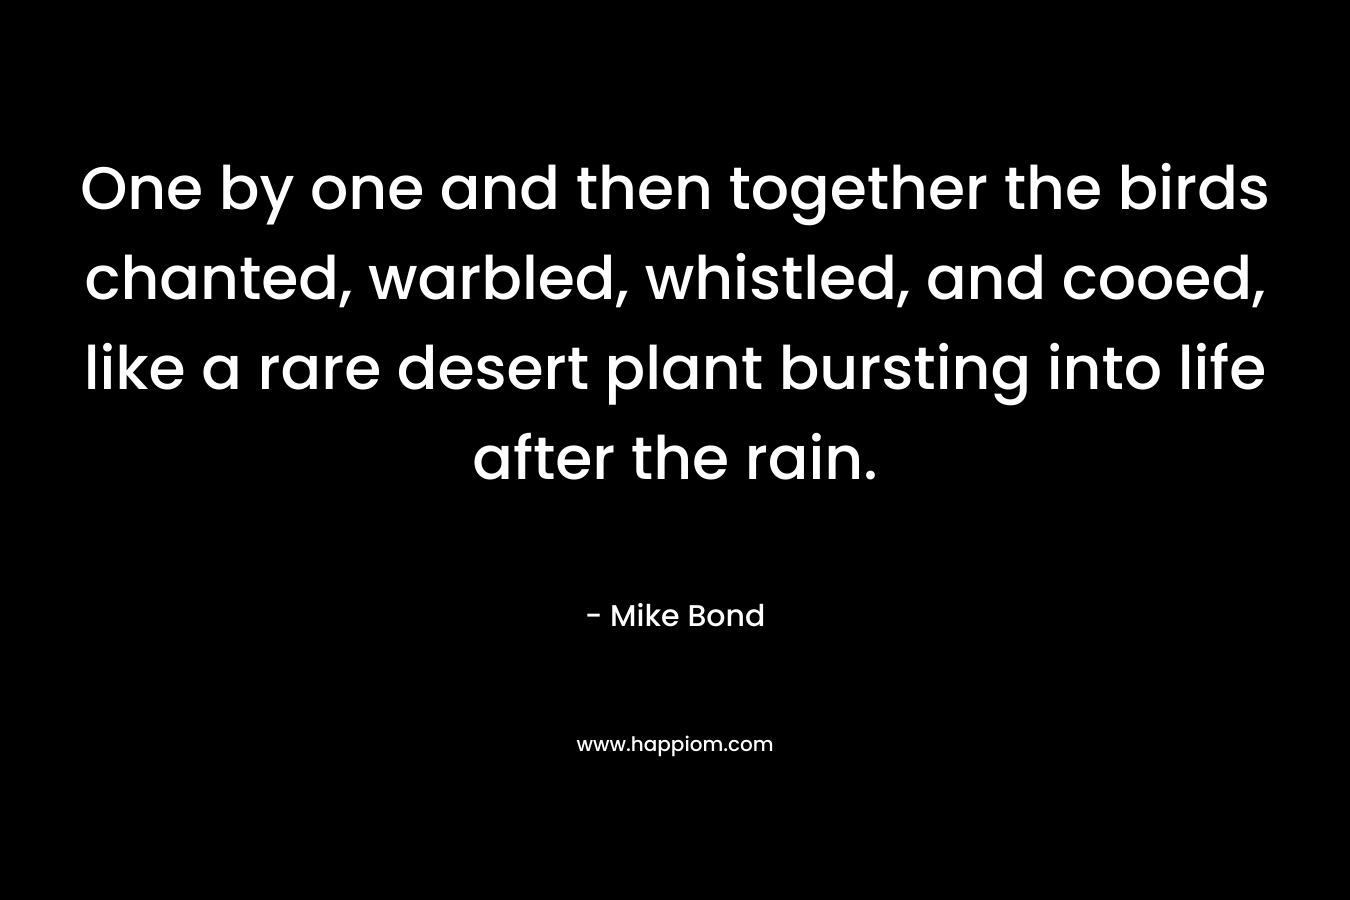 One by one and then together the birds chanted, warbled, whistled, and cooed, like a rare desert plant bursting into life after the rain. – Mike Bond